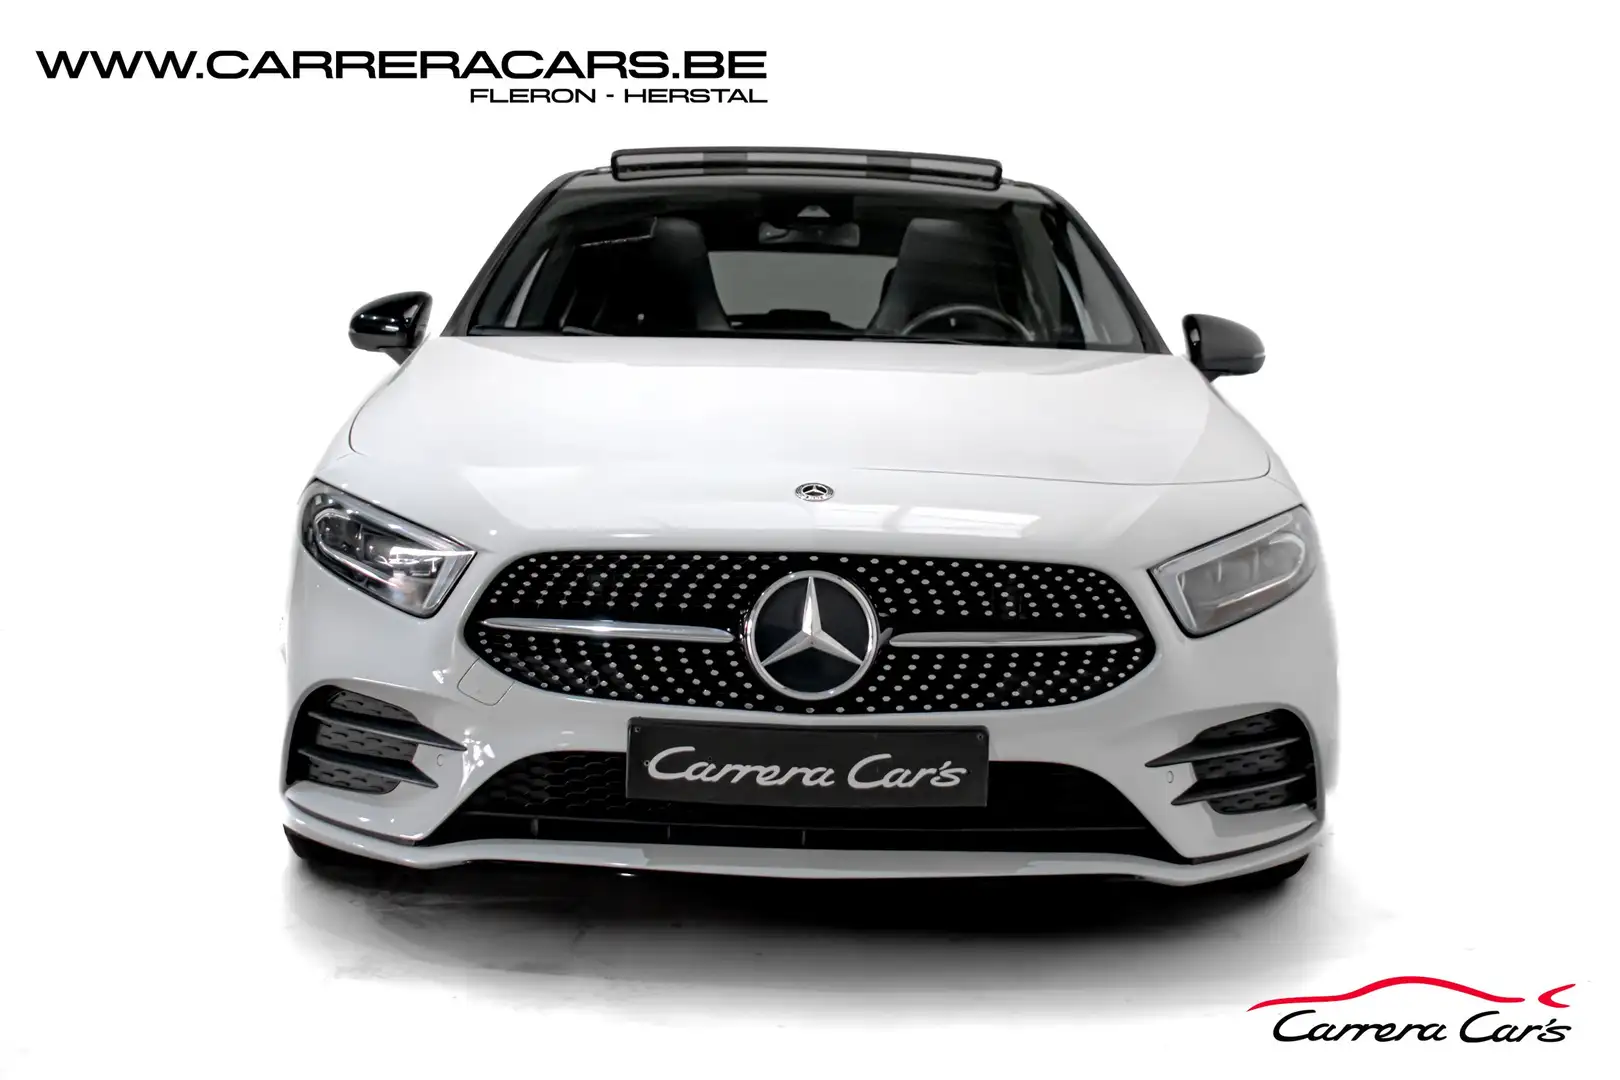 Mercedes-Benz A 180 d|*AMG*PANORAMA*XENON*CAMERA*CUIR*NAVI*LED*MBUX|* Wit - 2